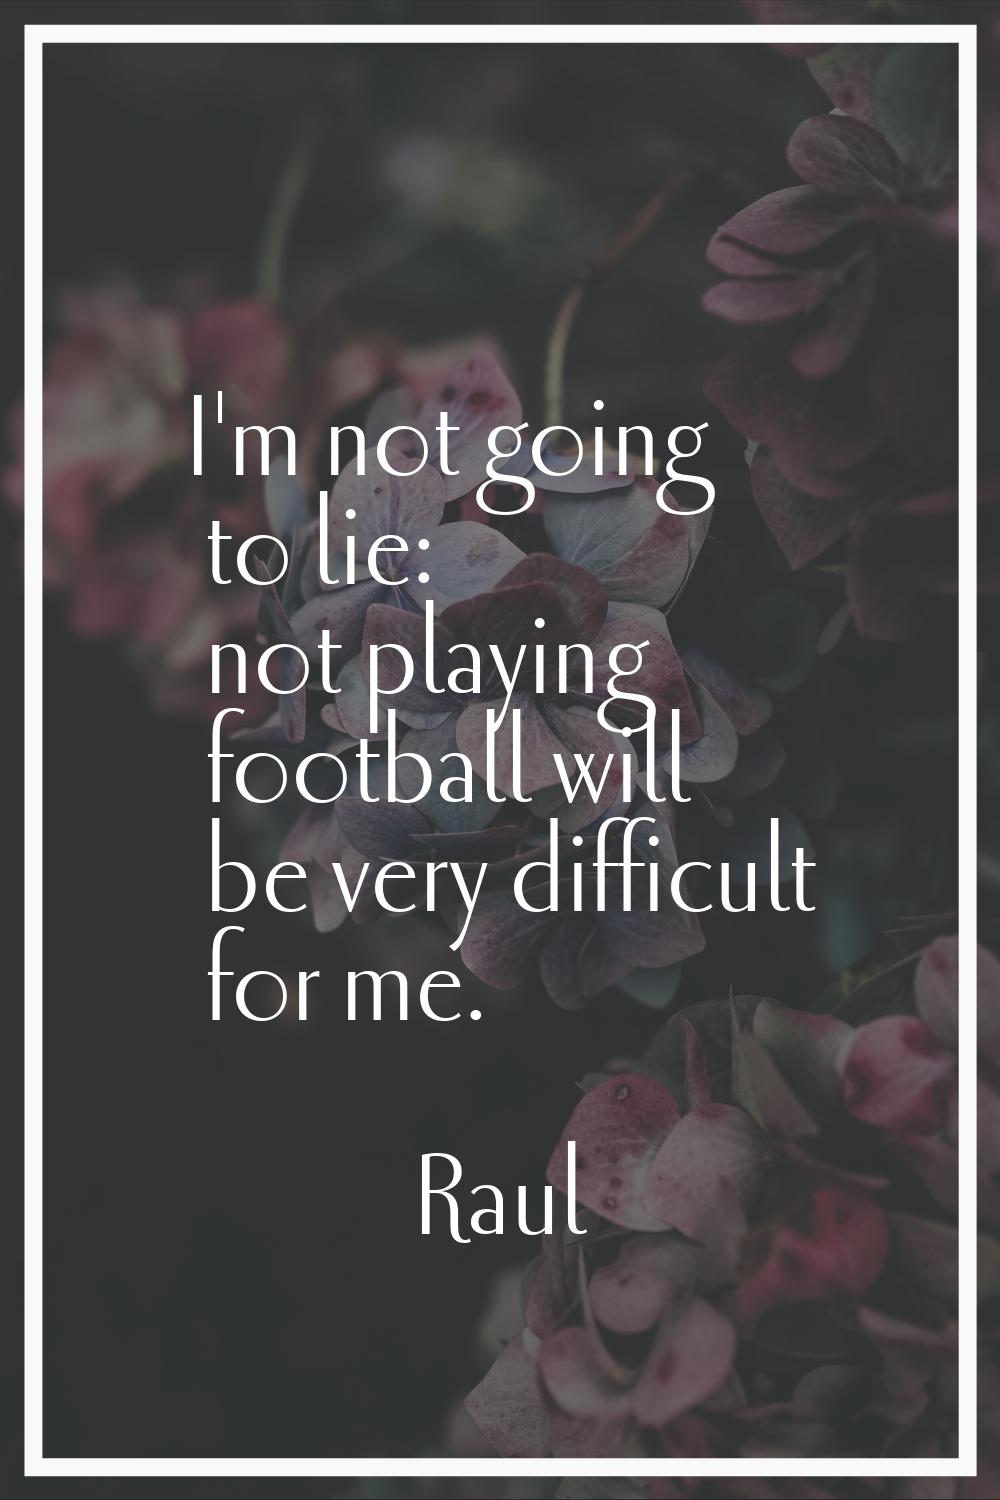 I'm not going to lie: not playing football will be very difficult for me.